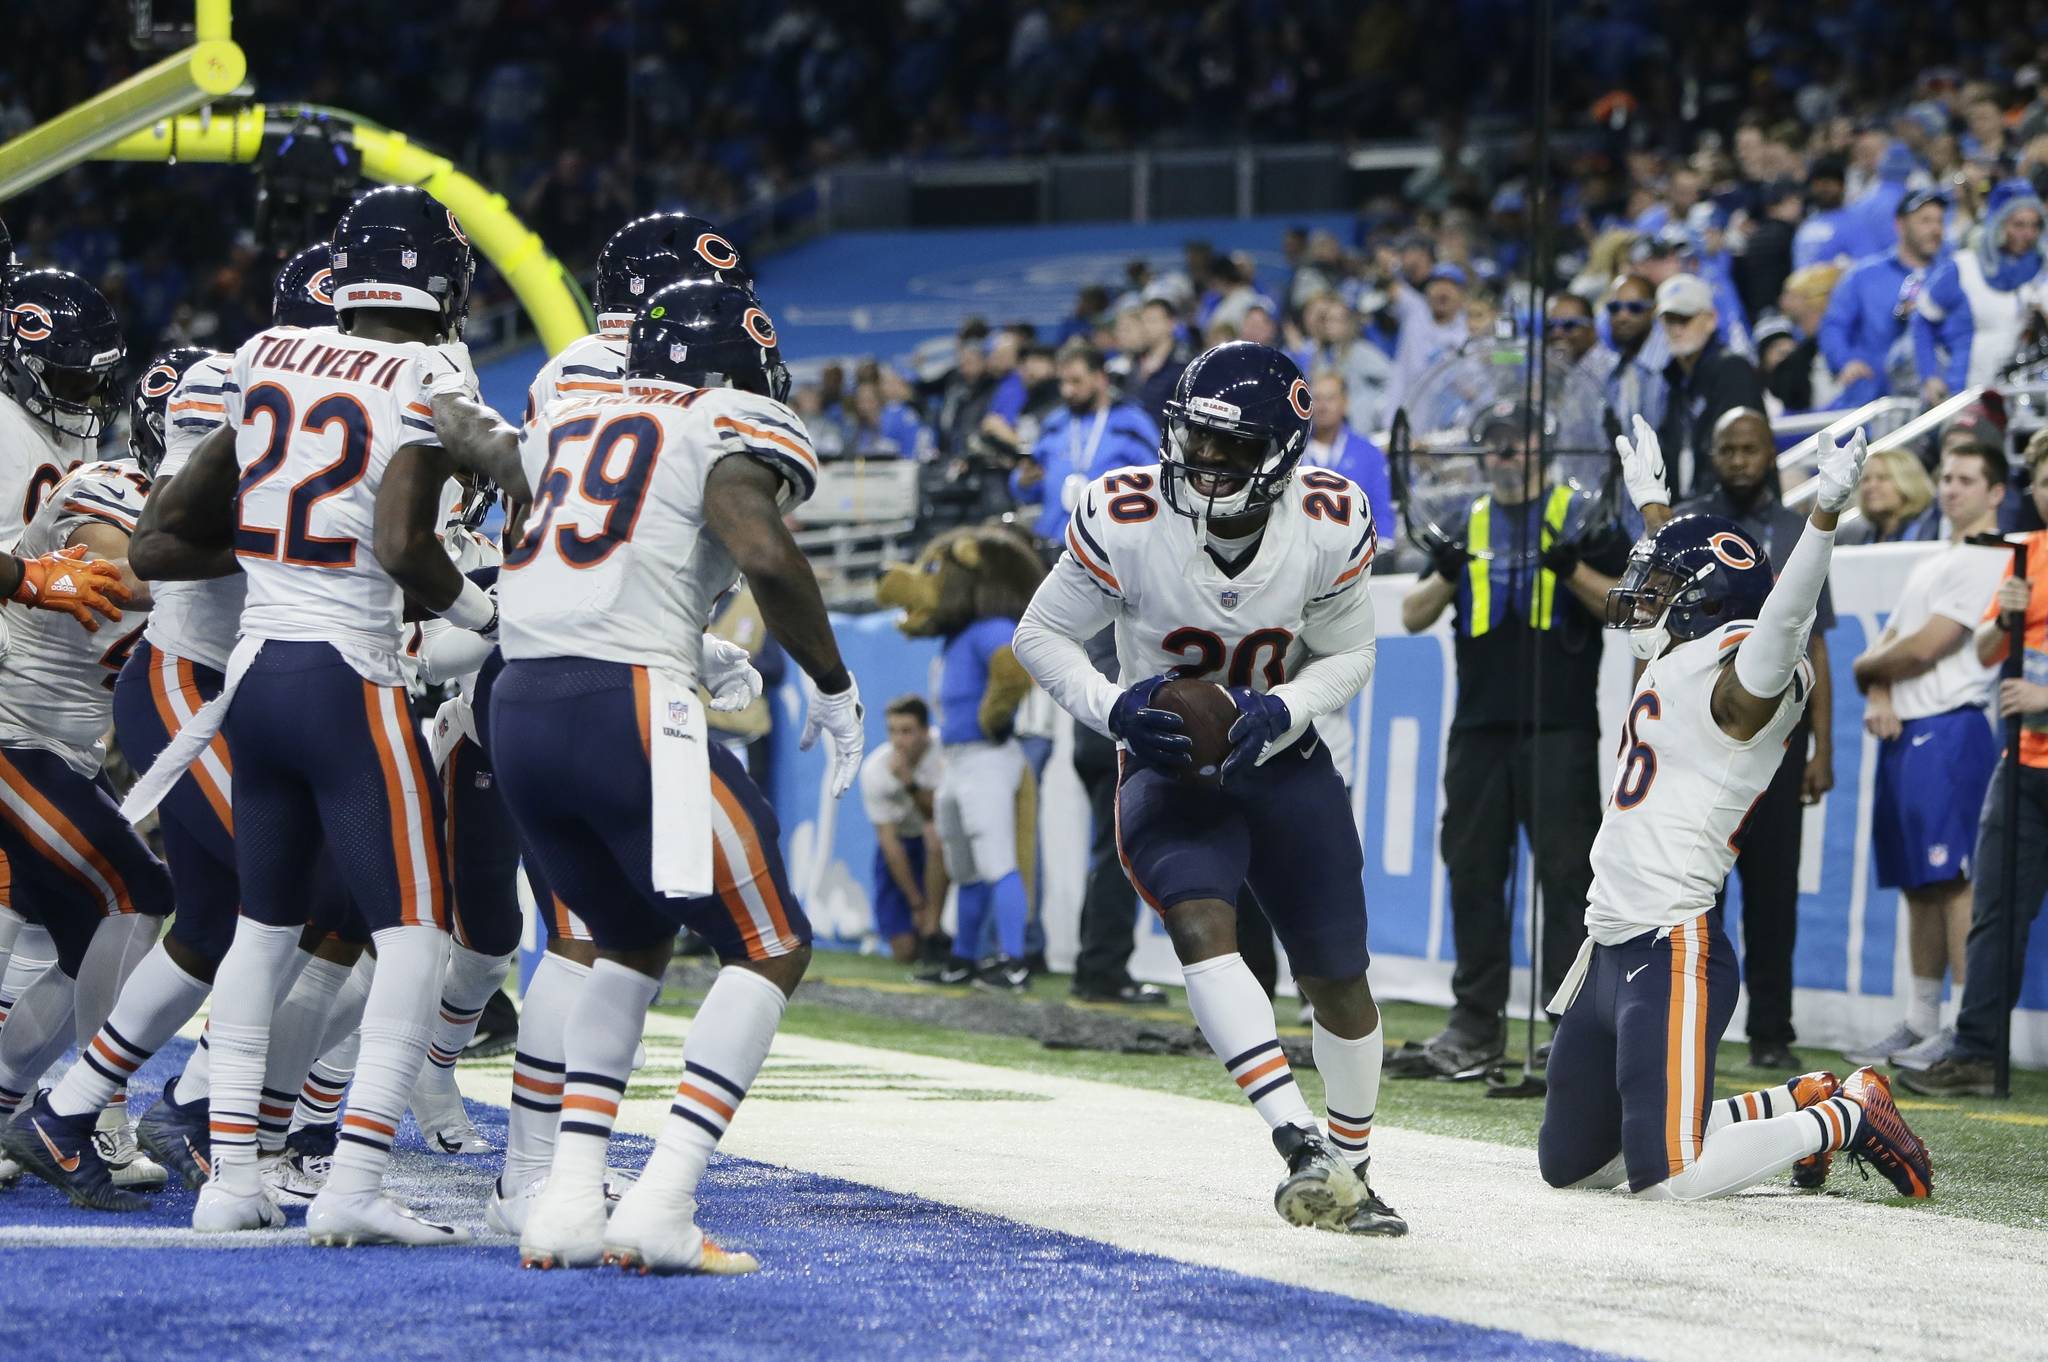 The Chicago Bears celebrate after cornerback Kyle Fuller intercepted a pass in the end zone intended for Detroit Lions tight end Michael Roberts during the second half of their game on Thursday, Nov. 22, 2018, in Detroit. (Duane Burleson | Associated Press)